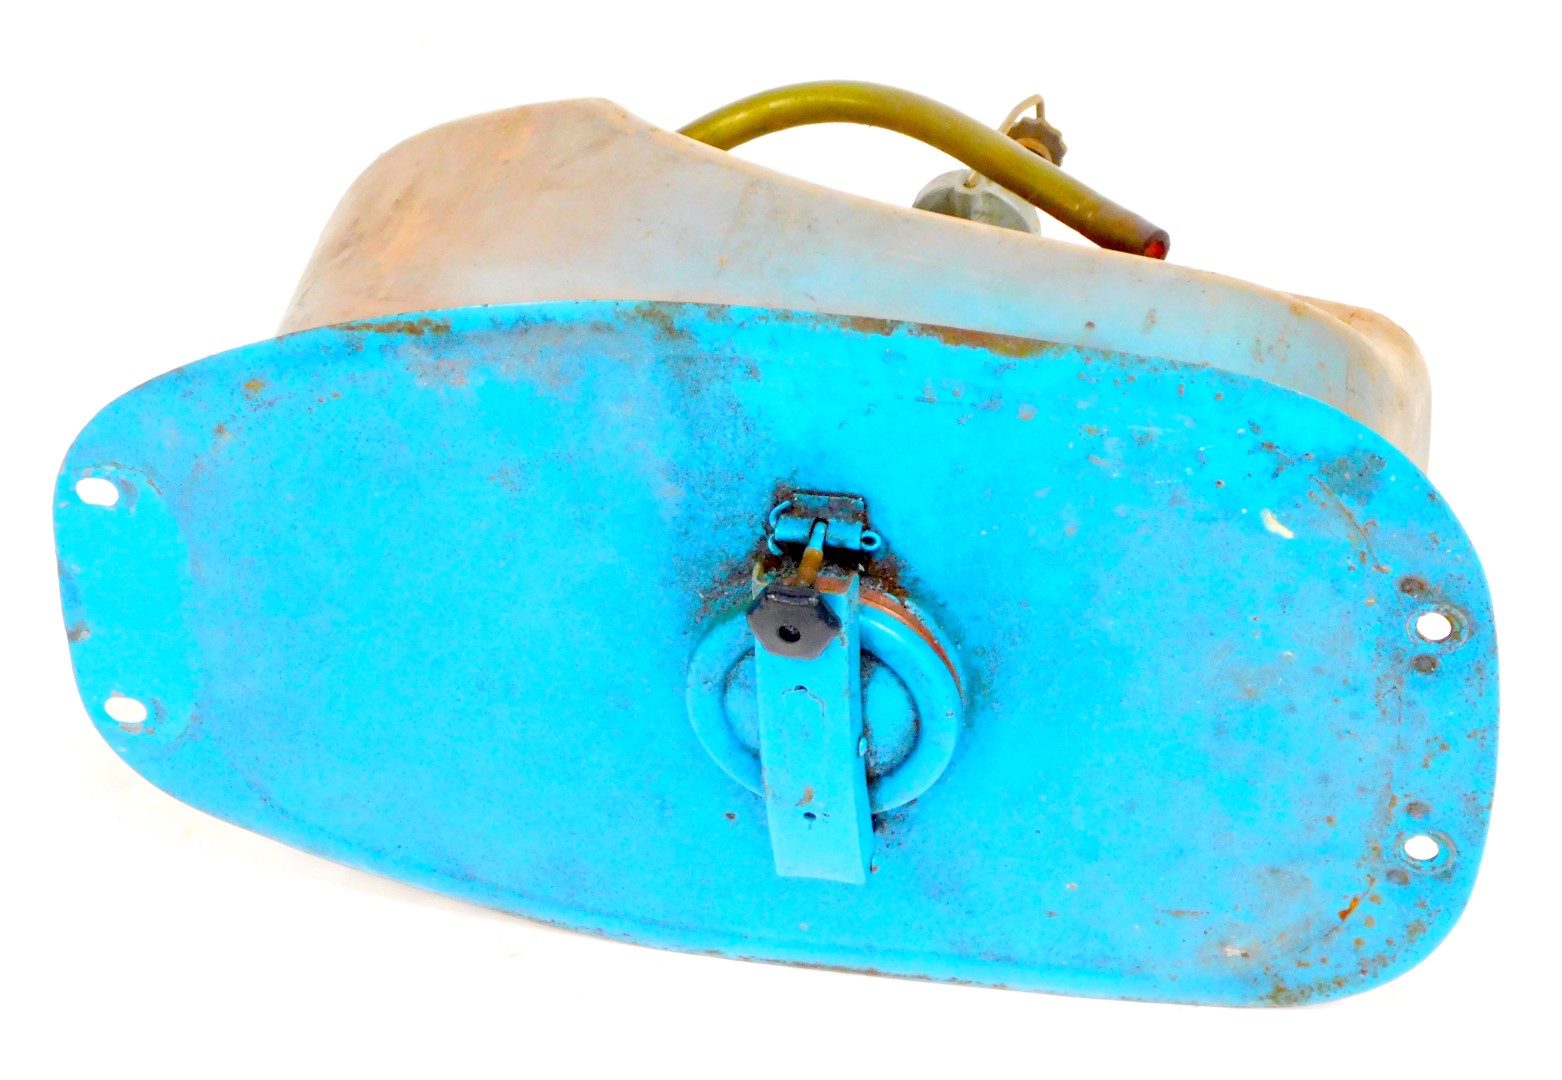 A motorbike fuel tank, painted in blue.